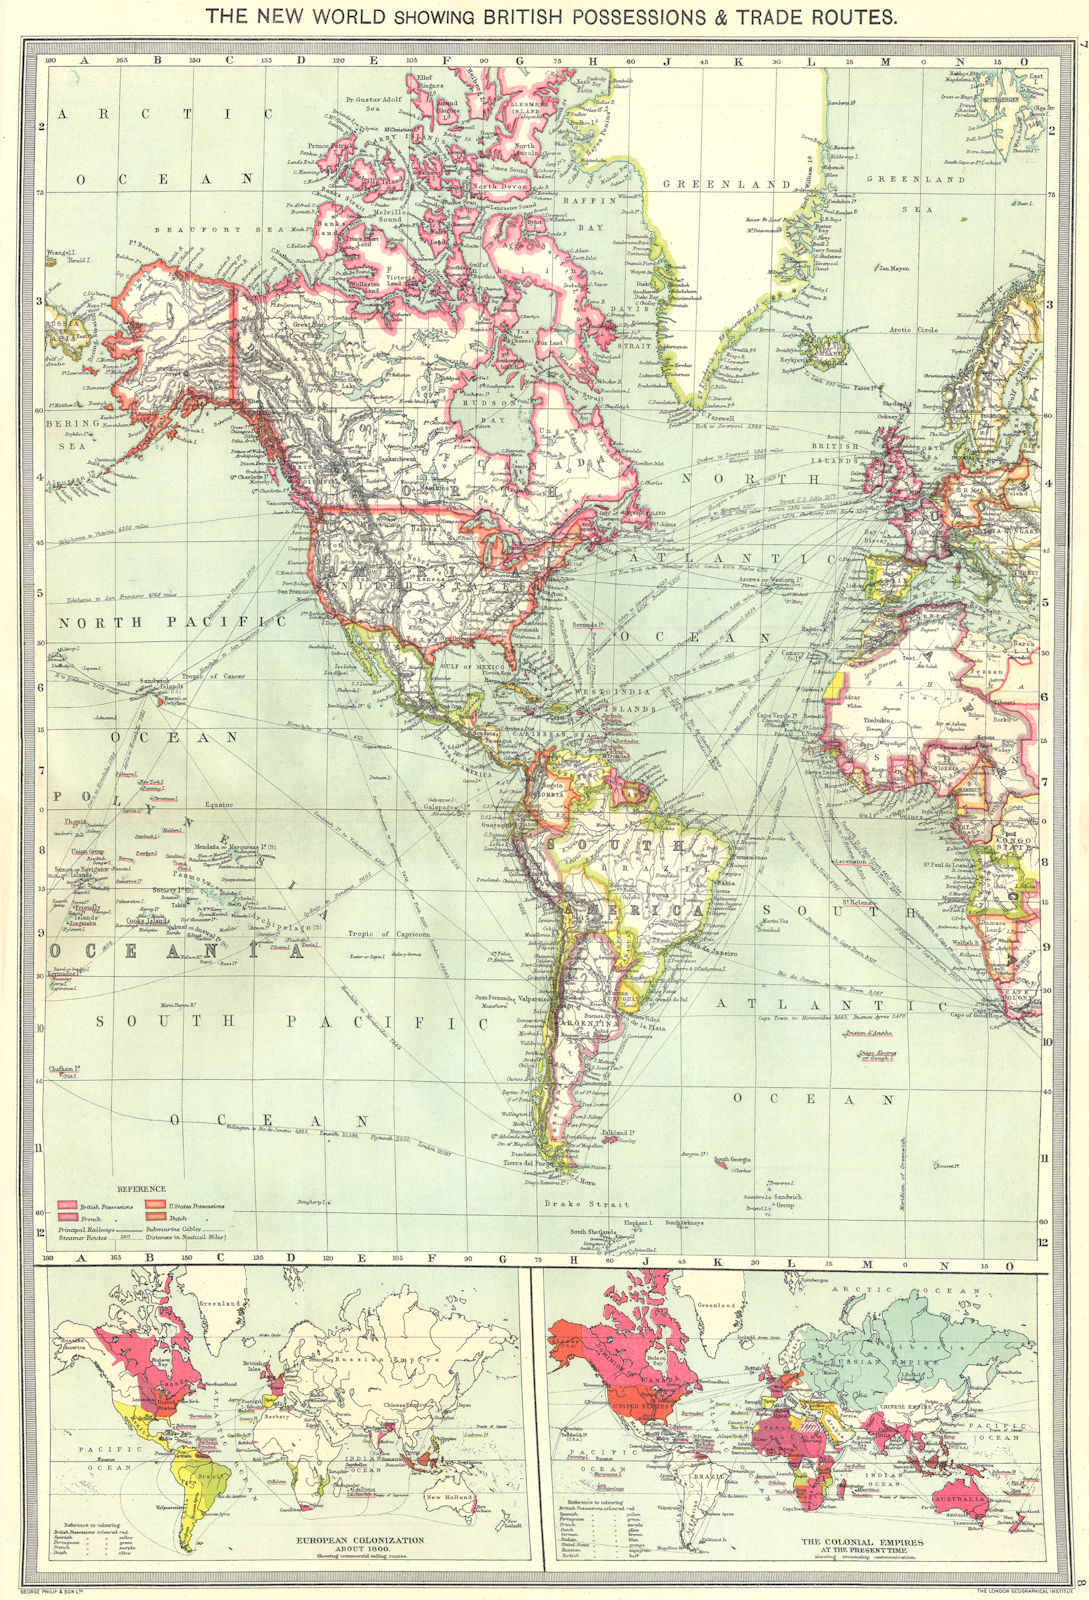 Associate Product AMERICAS. British colonies trade routes; European Colonization 1907 old map